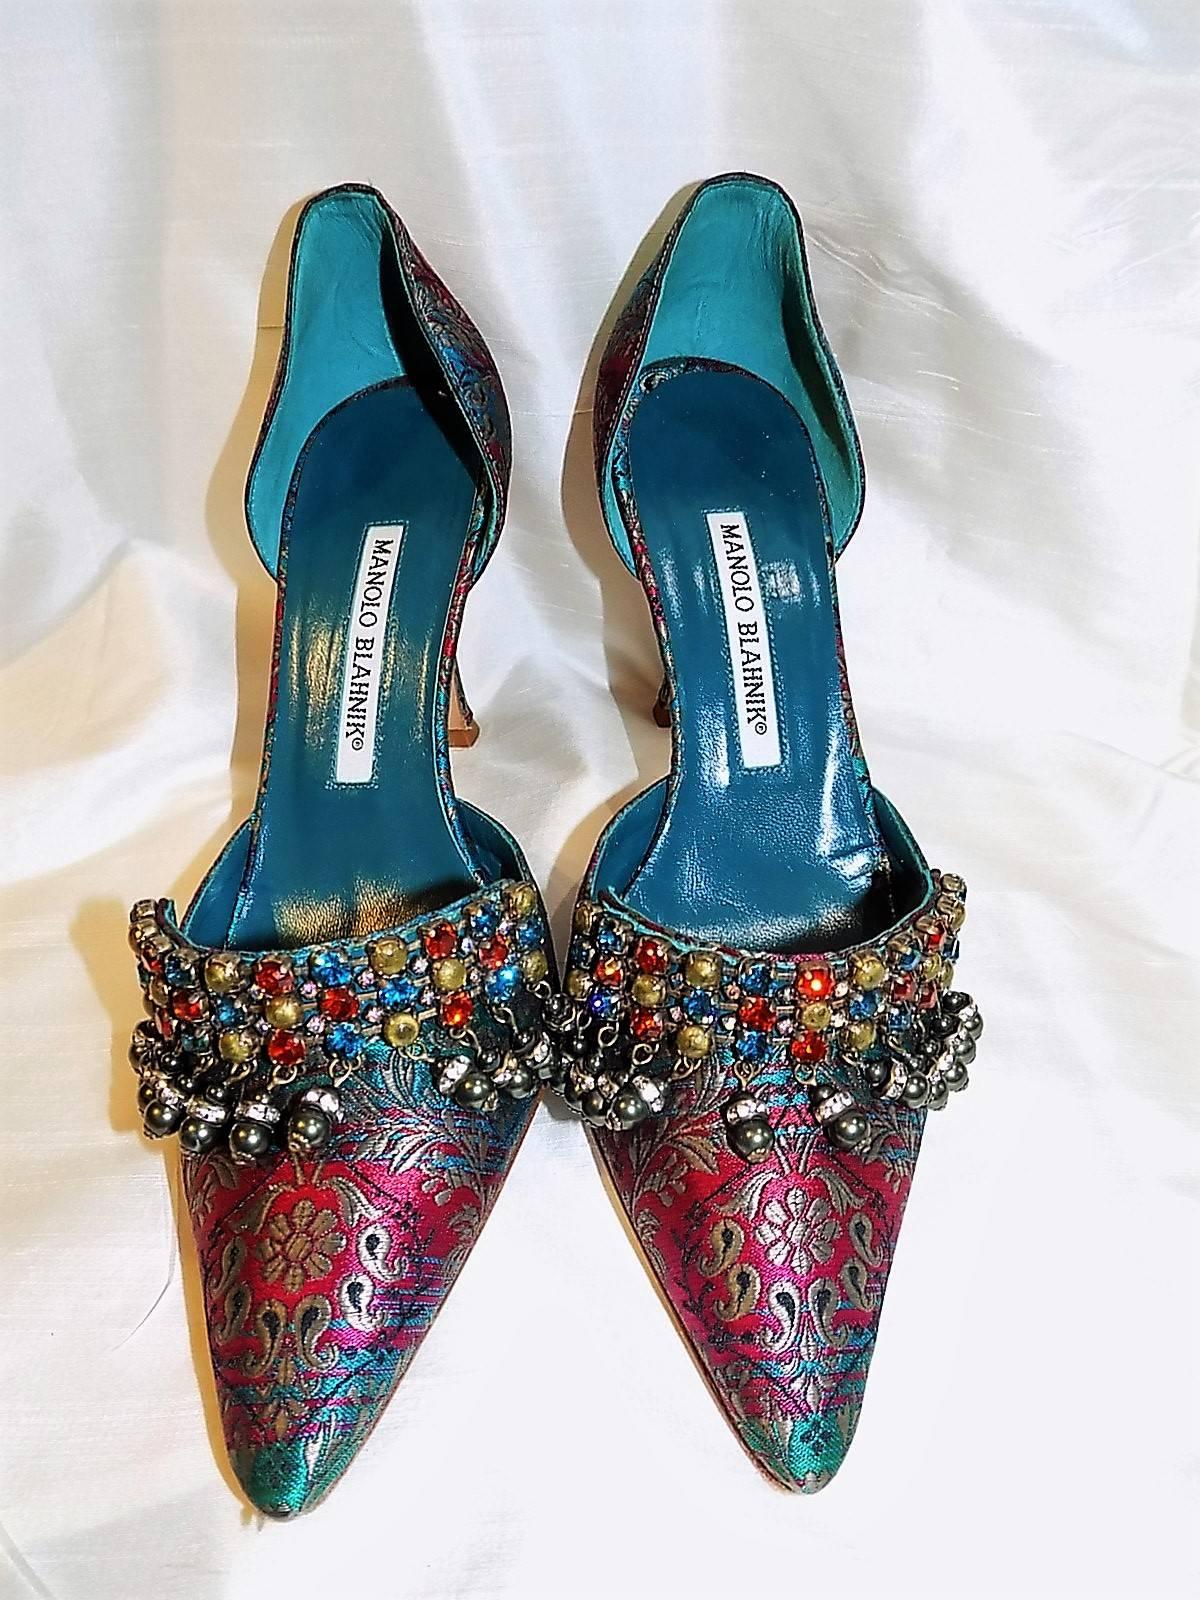 Manolo Blahnik   spectacular silk brocade shoes  size 37 pointed front Bejeweled with large blue and red crystals tiger eye and dark hanging beads worn once excellent condition with few scratches only only on the bottom sole heel 3/5